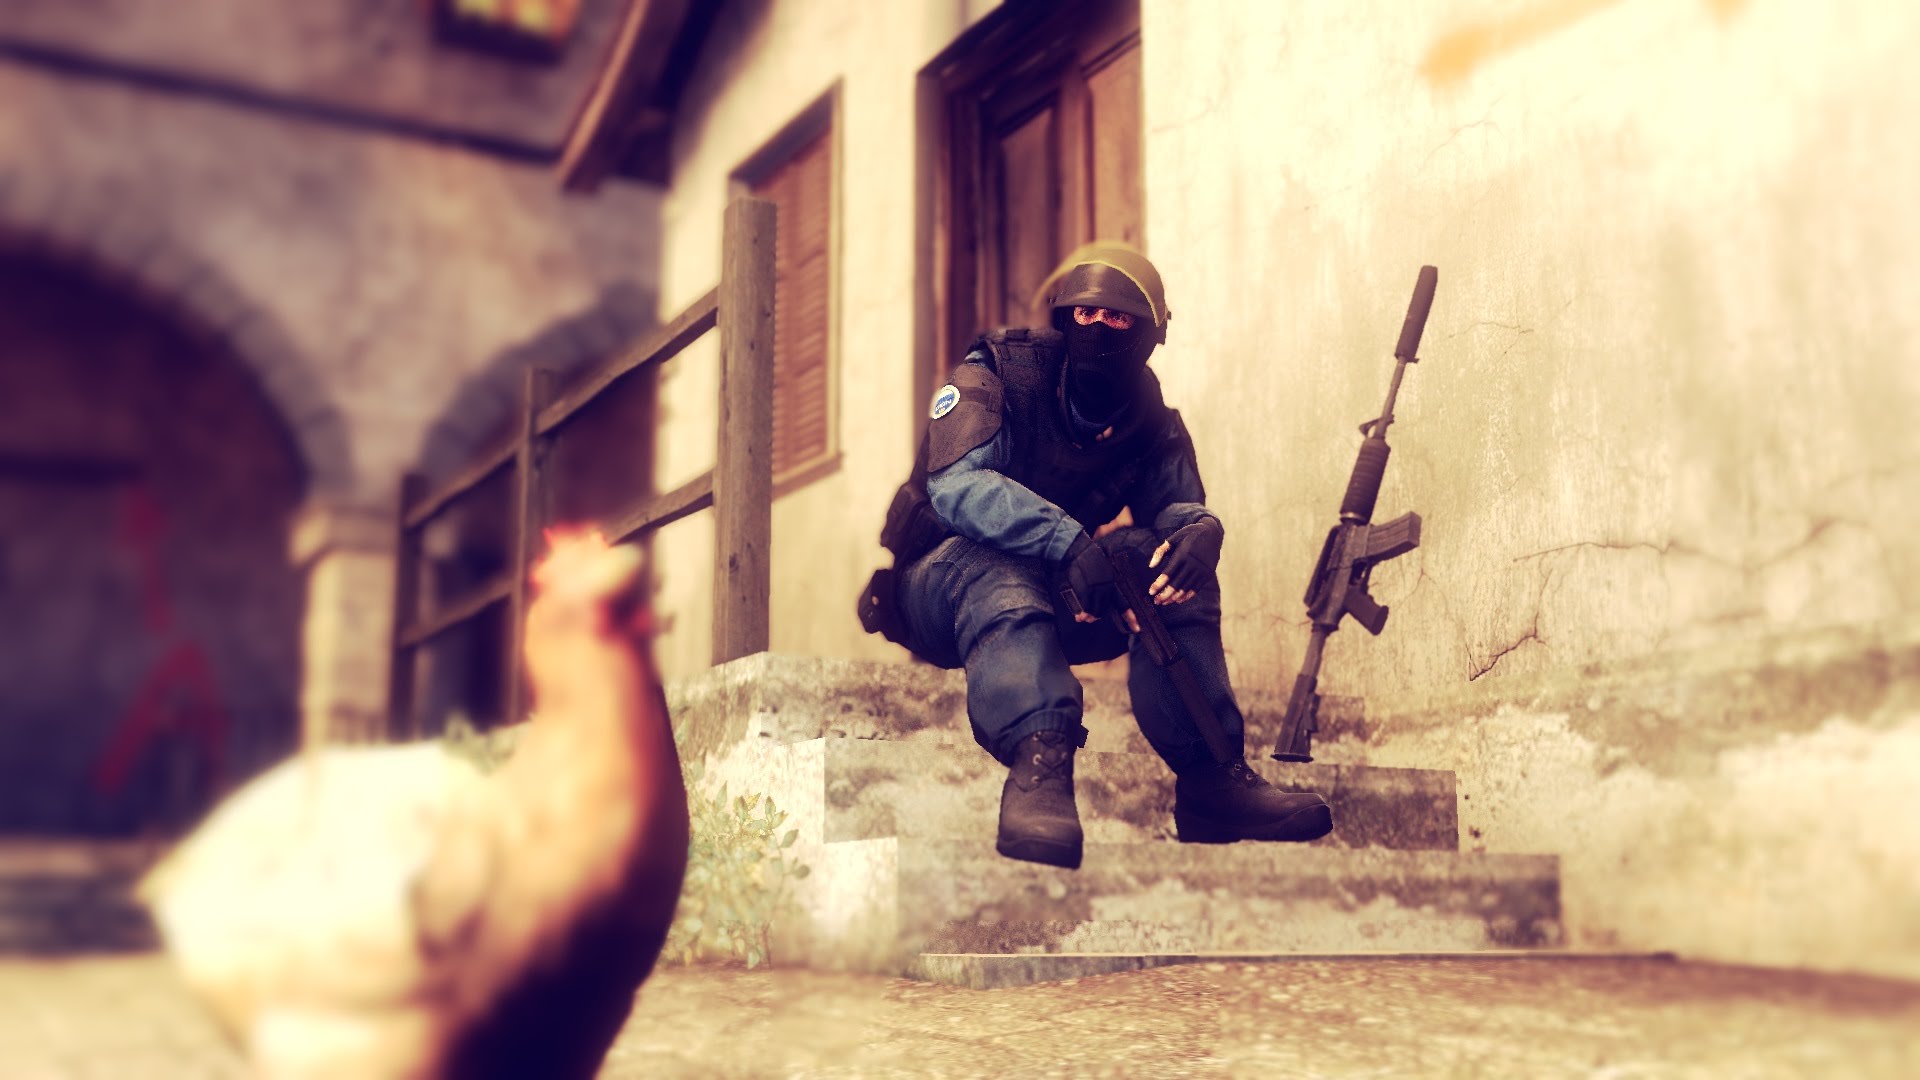 Cheating: The Consequences of Cheating in CS:GO